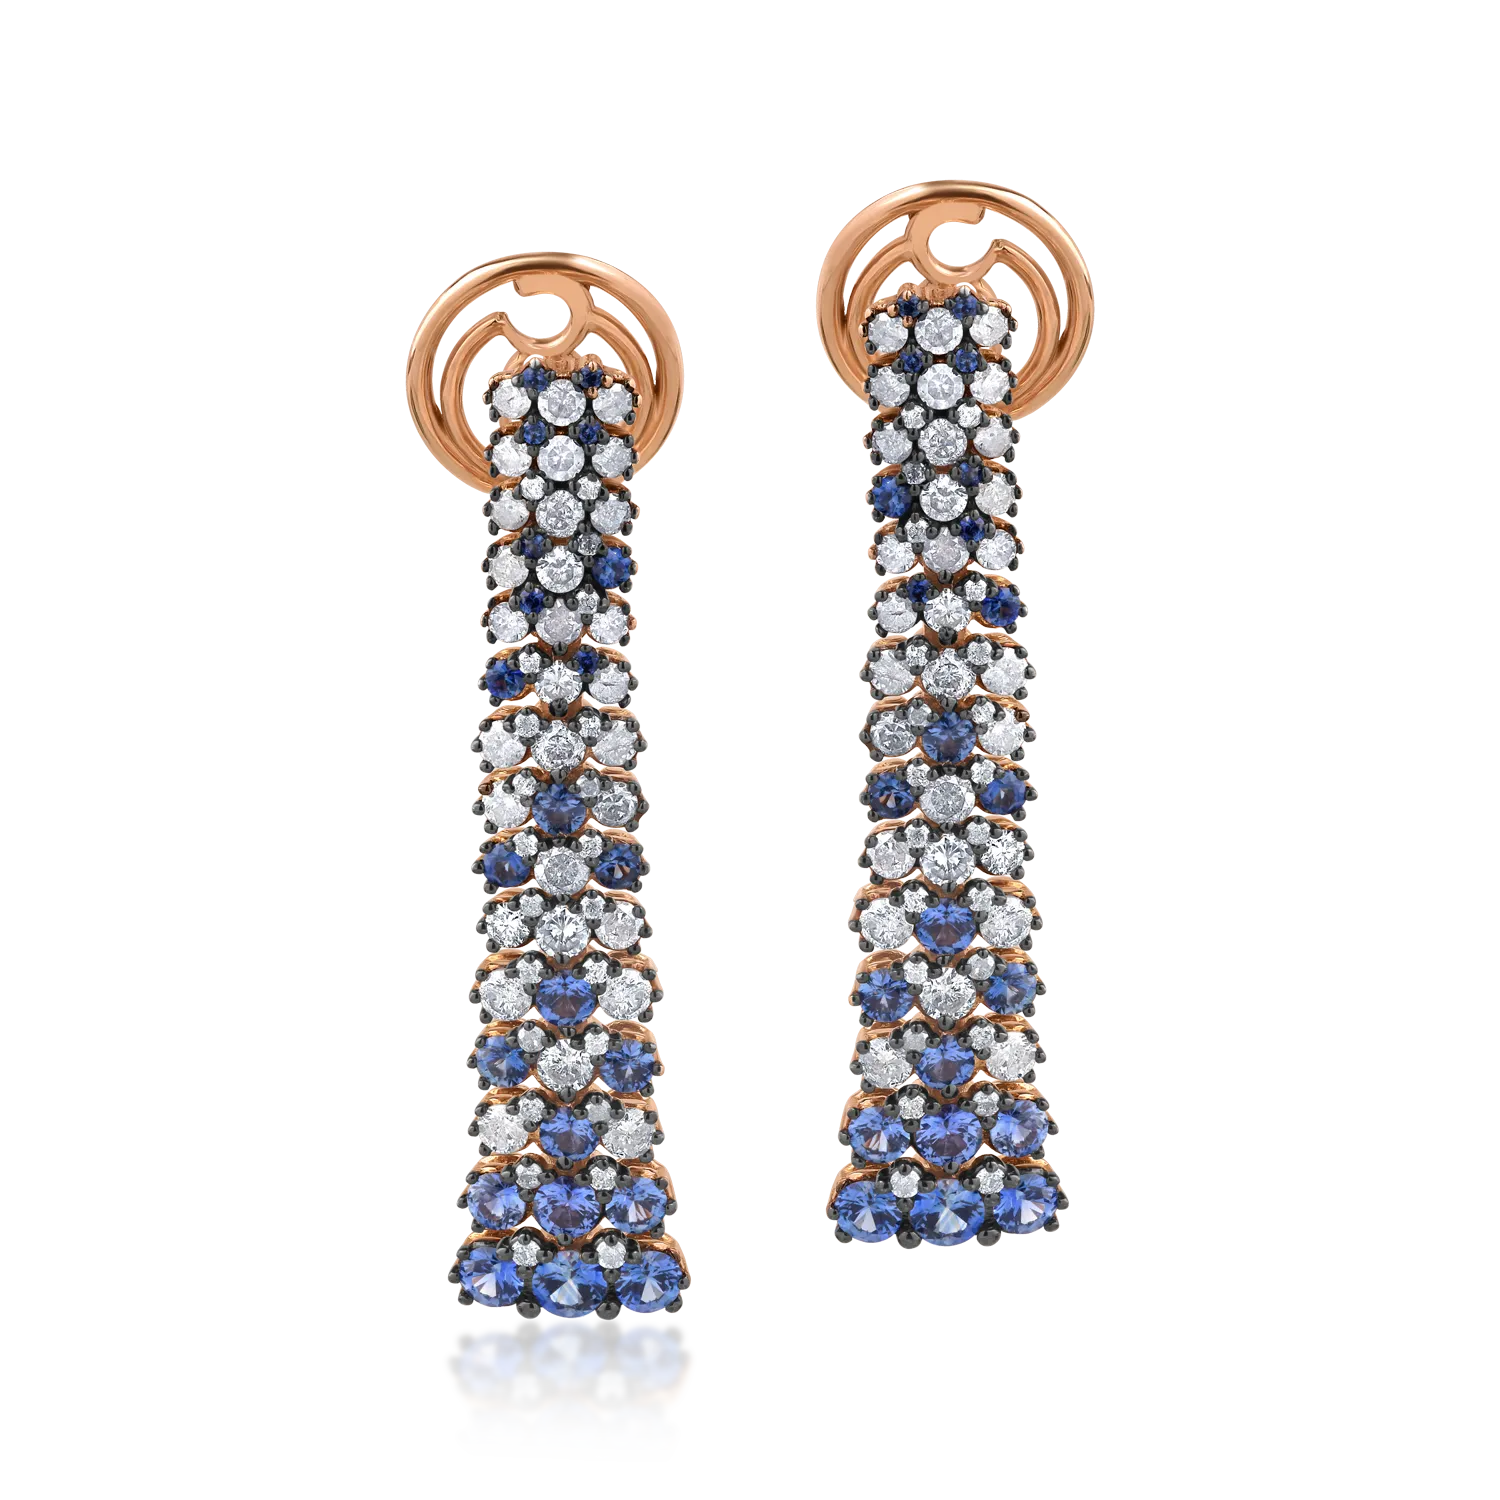 18K rose gold earrings with 1.6ct sapphires and 1.6ct diamonds